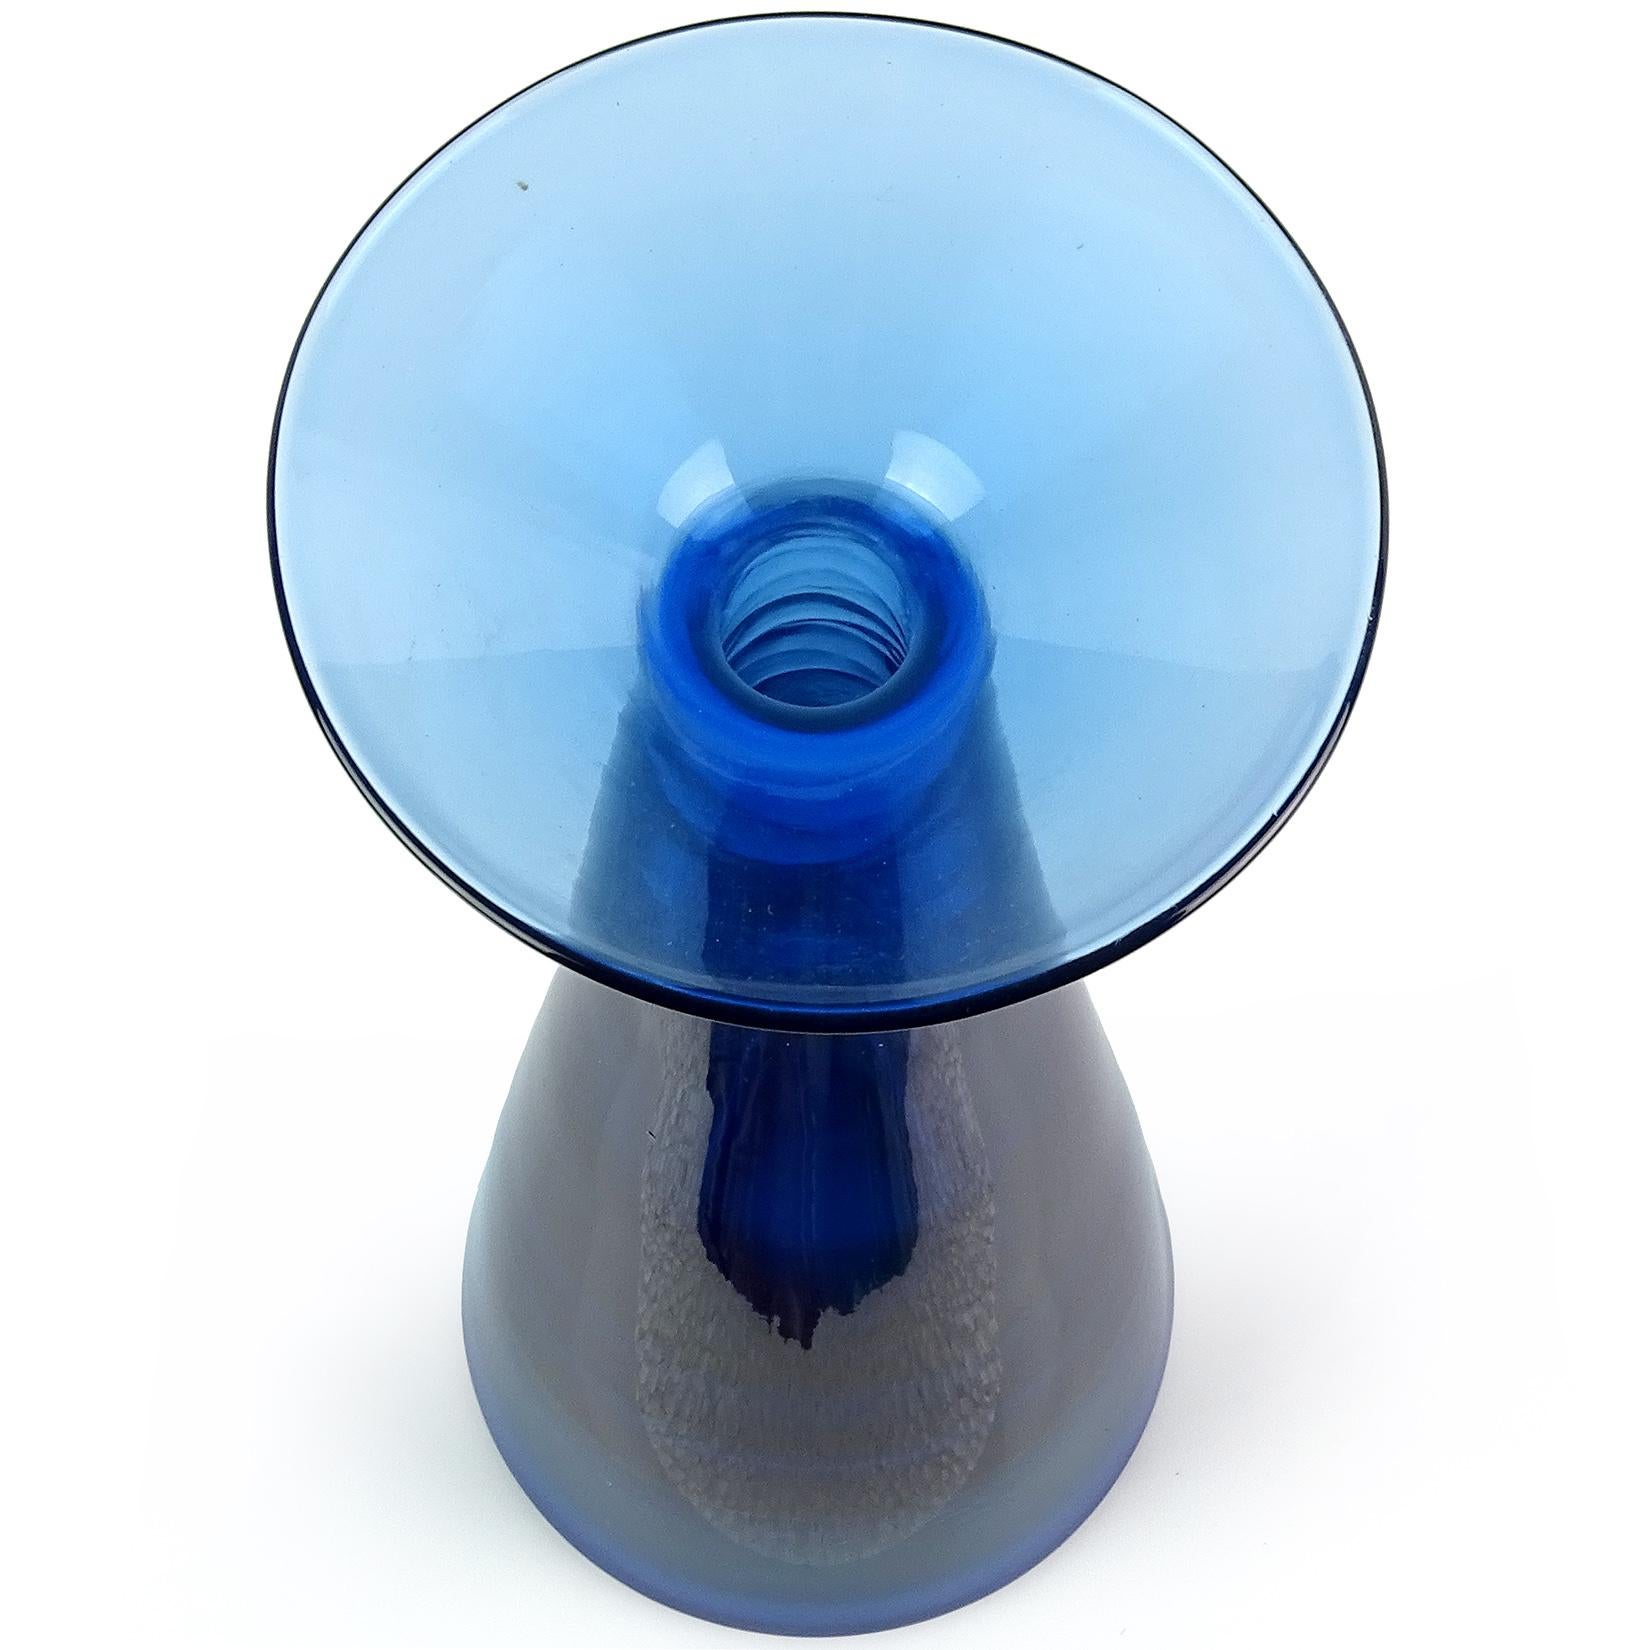 Gorgeous large vintage Murano hand blown Sommerso aqua blue over cobalt blue Italian art glass flower vase. Attributed to the Seguso Vetri d'Arte company. The piece has an amazing Space Age shape, with oversize and flattened mouth to the vase. Made